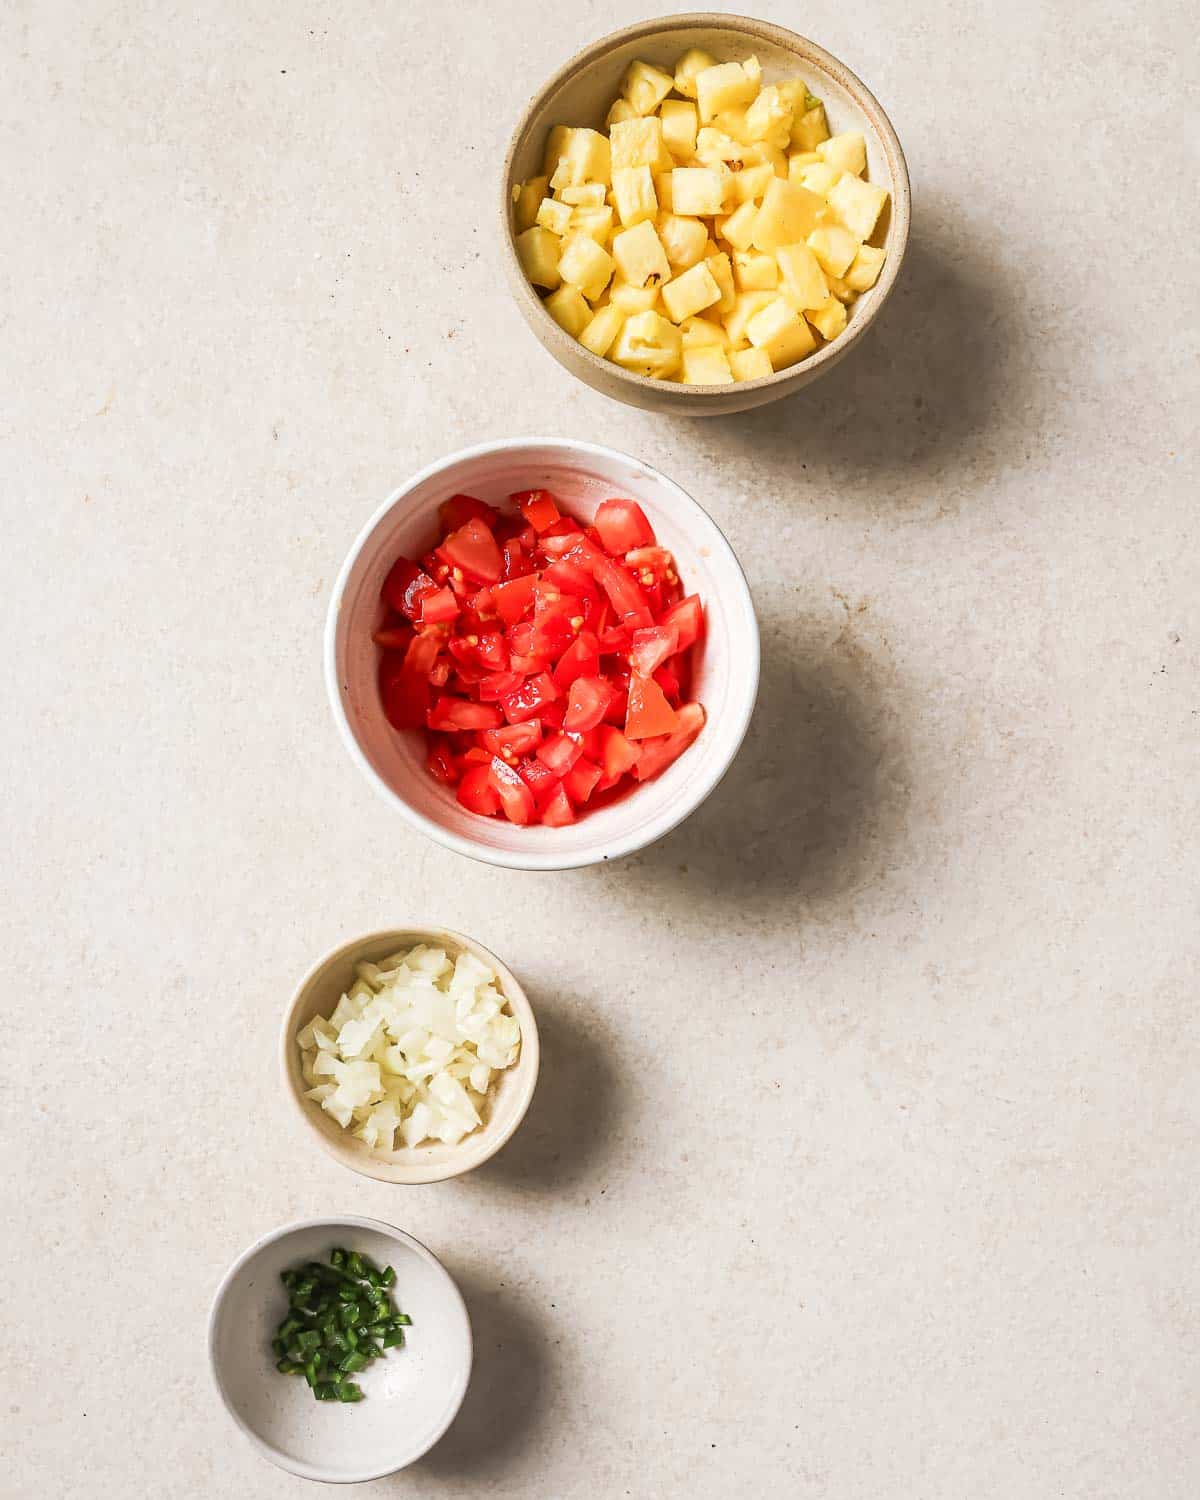 Several bowls containing the chopped ingredients for pineapple salsa on a white surface.